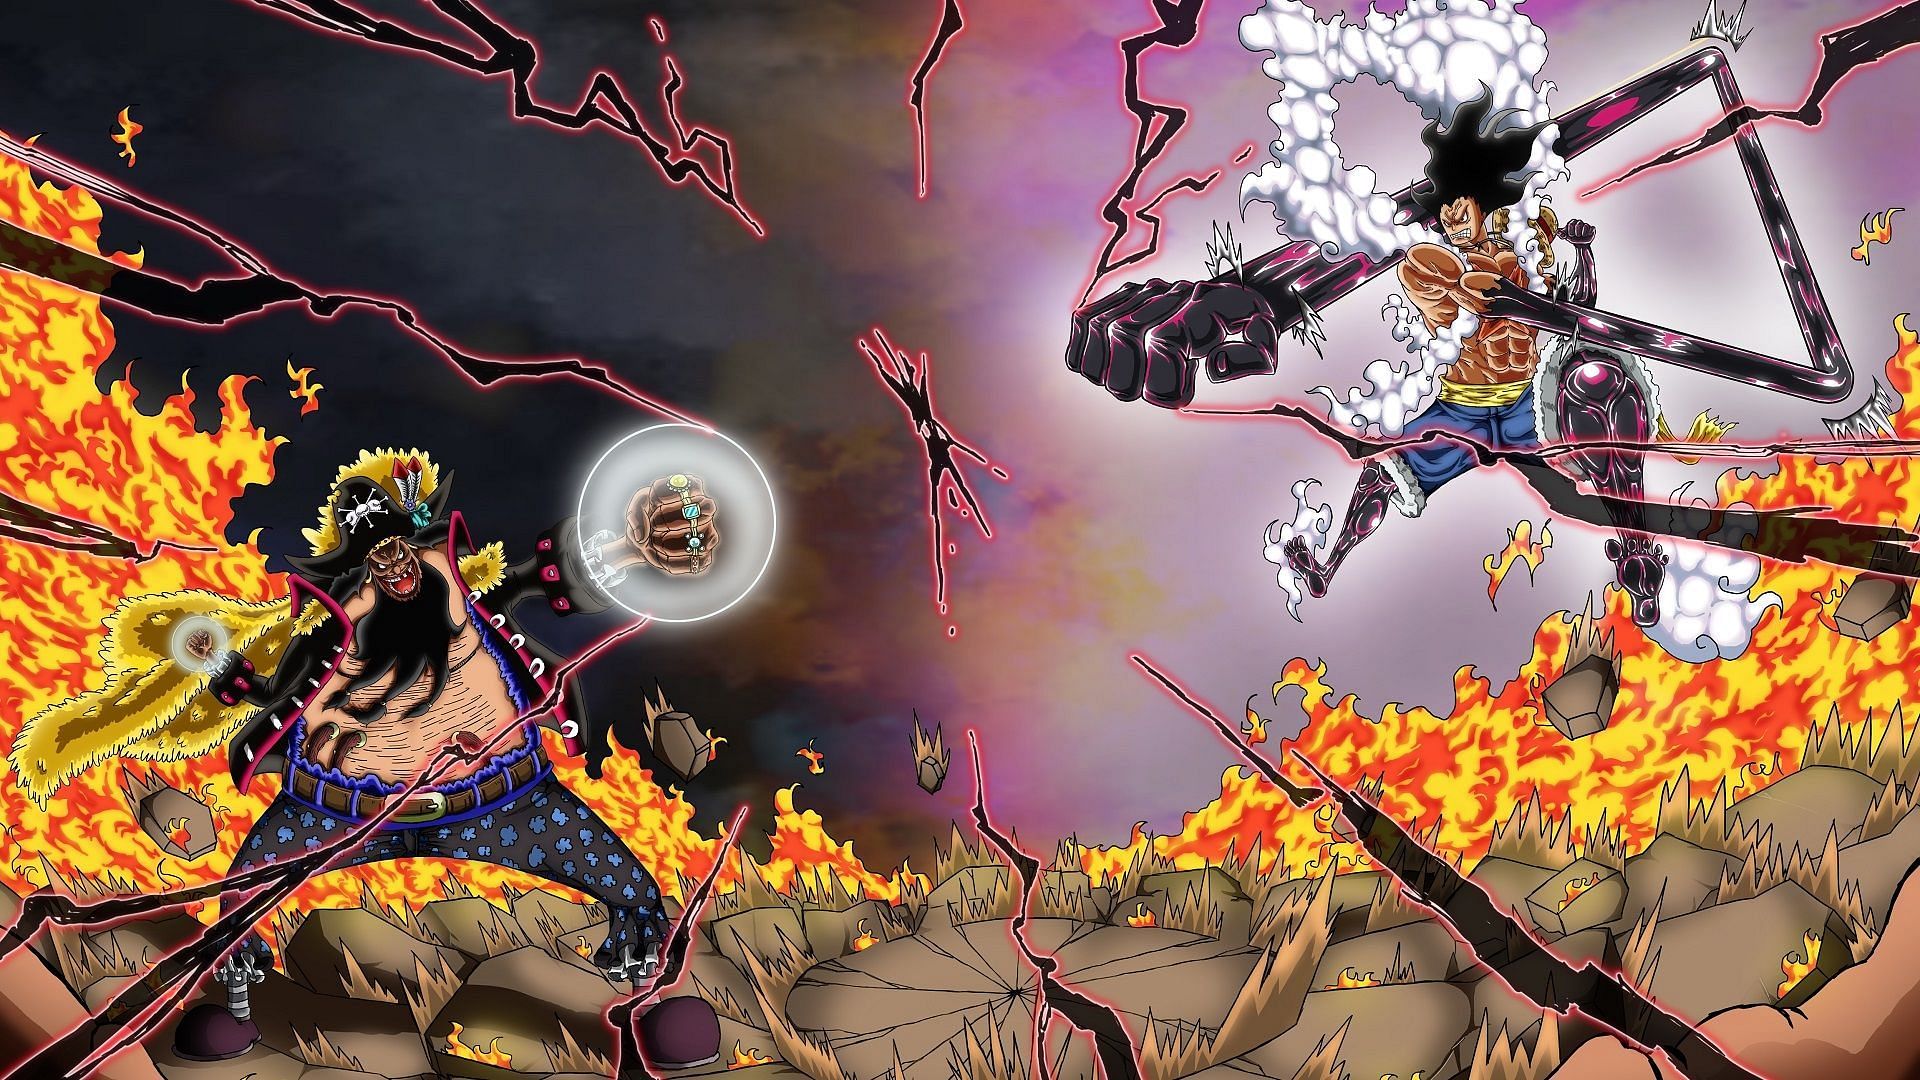 The battle between Luffy and Blackbeard will be one of the key events of One Piece